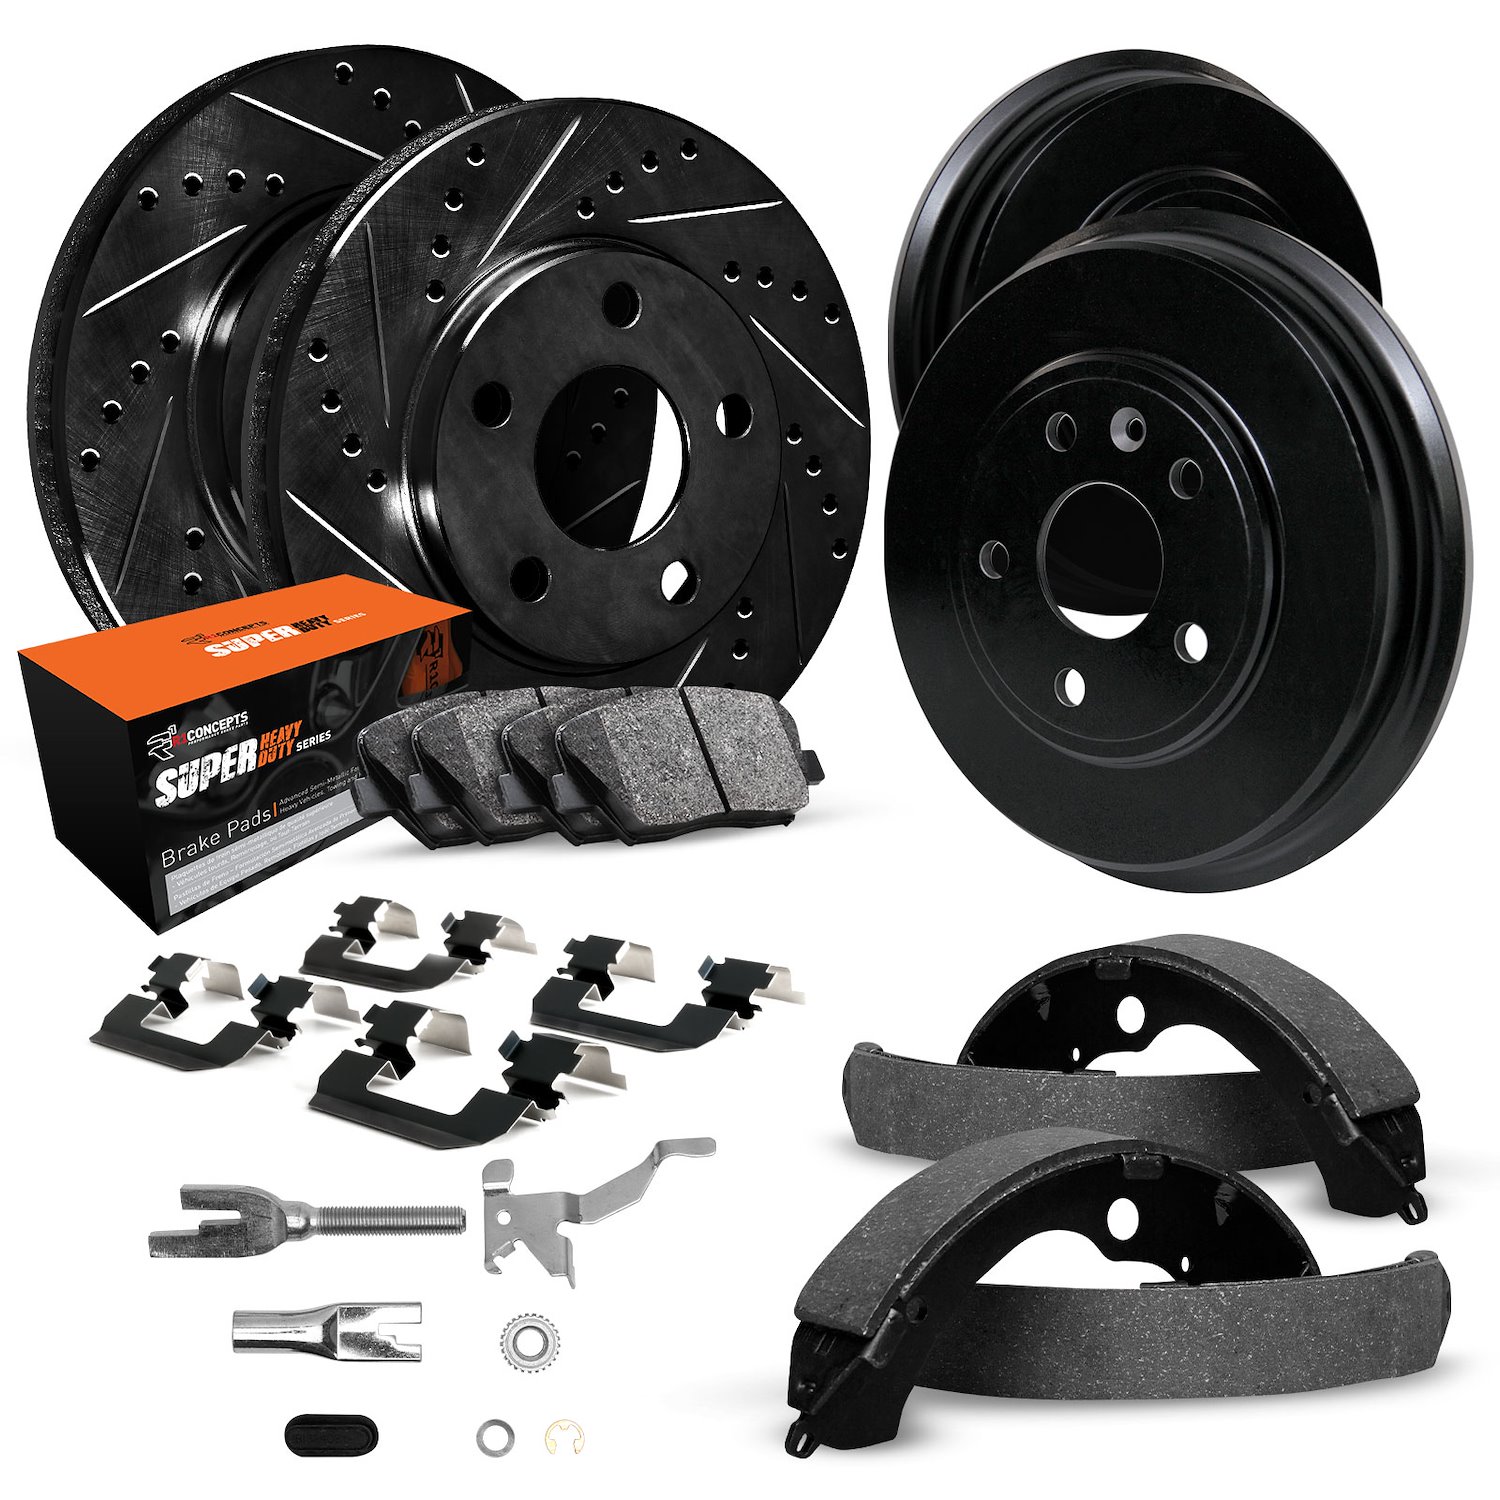 E-Line Drilled/Slotted Black Rotor & Drum Set w/Super-Duty Pads, Shoes, Hardware/Adjusters, 1986-1990 Ford/Lincoln/Mercury/Mazda